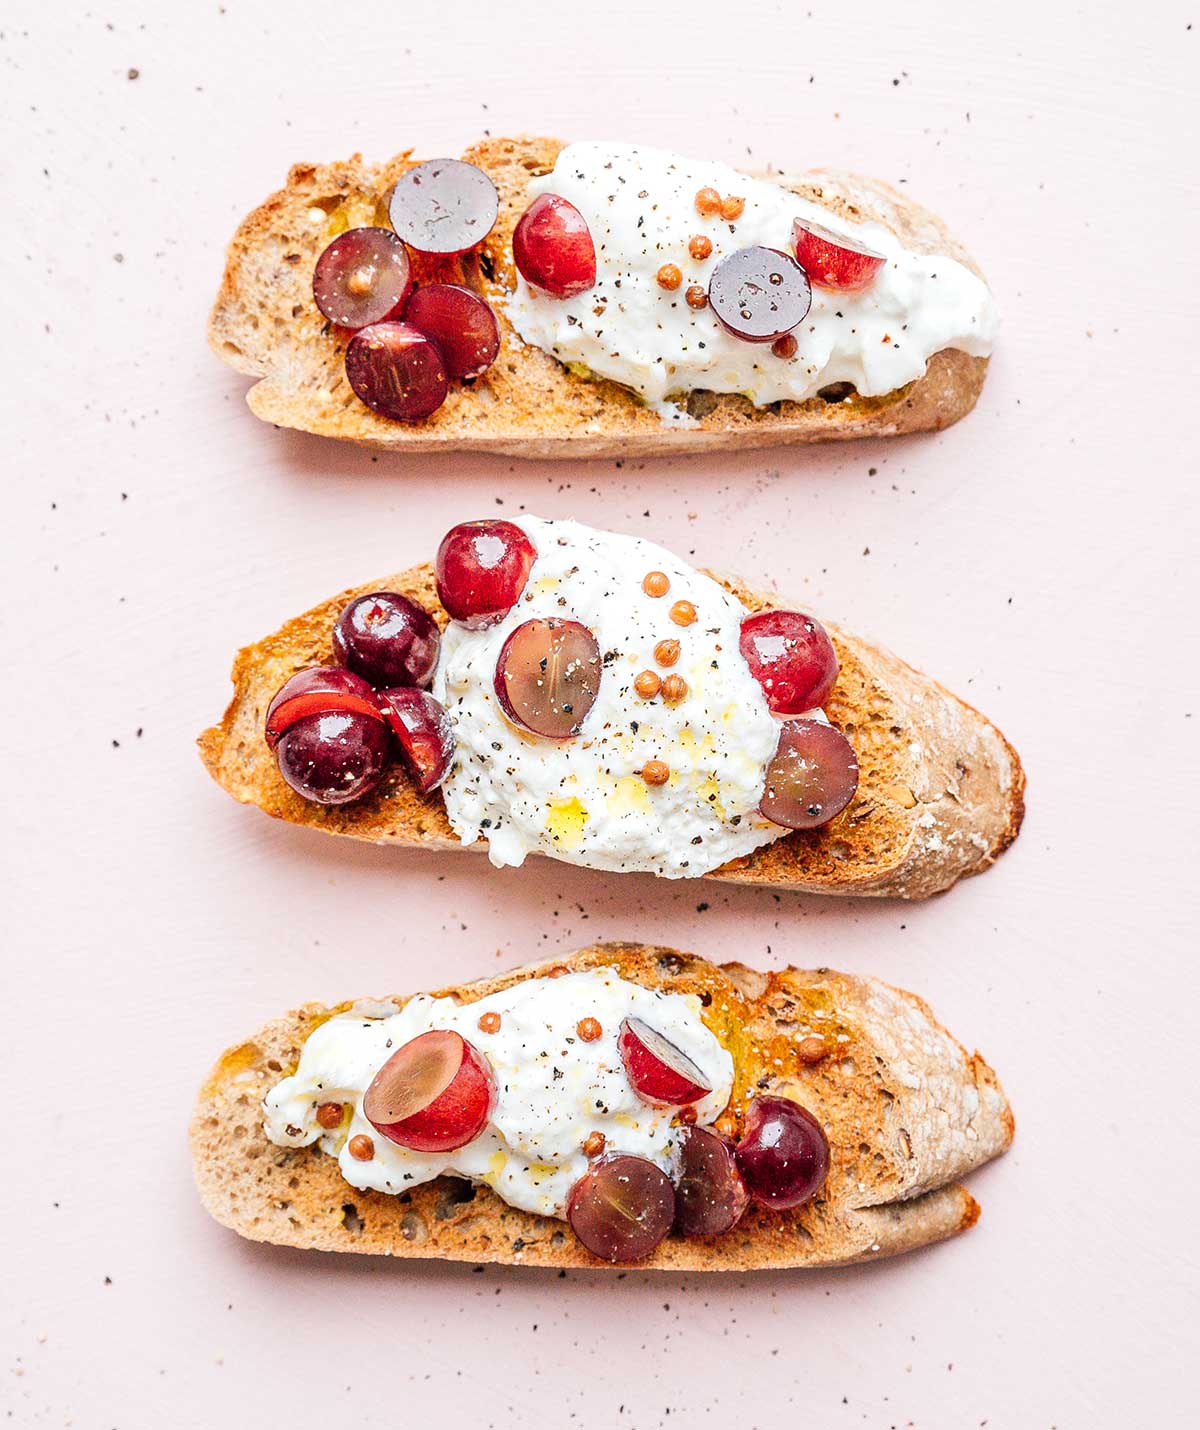 Three slices of toast topped with burrata, black peppercorns, and pickled grapes